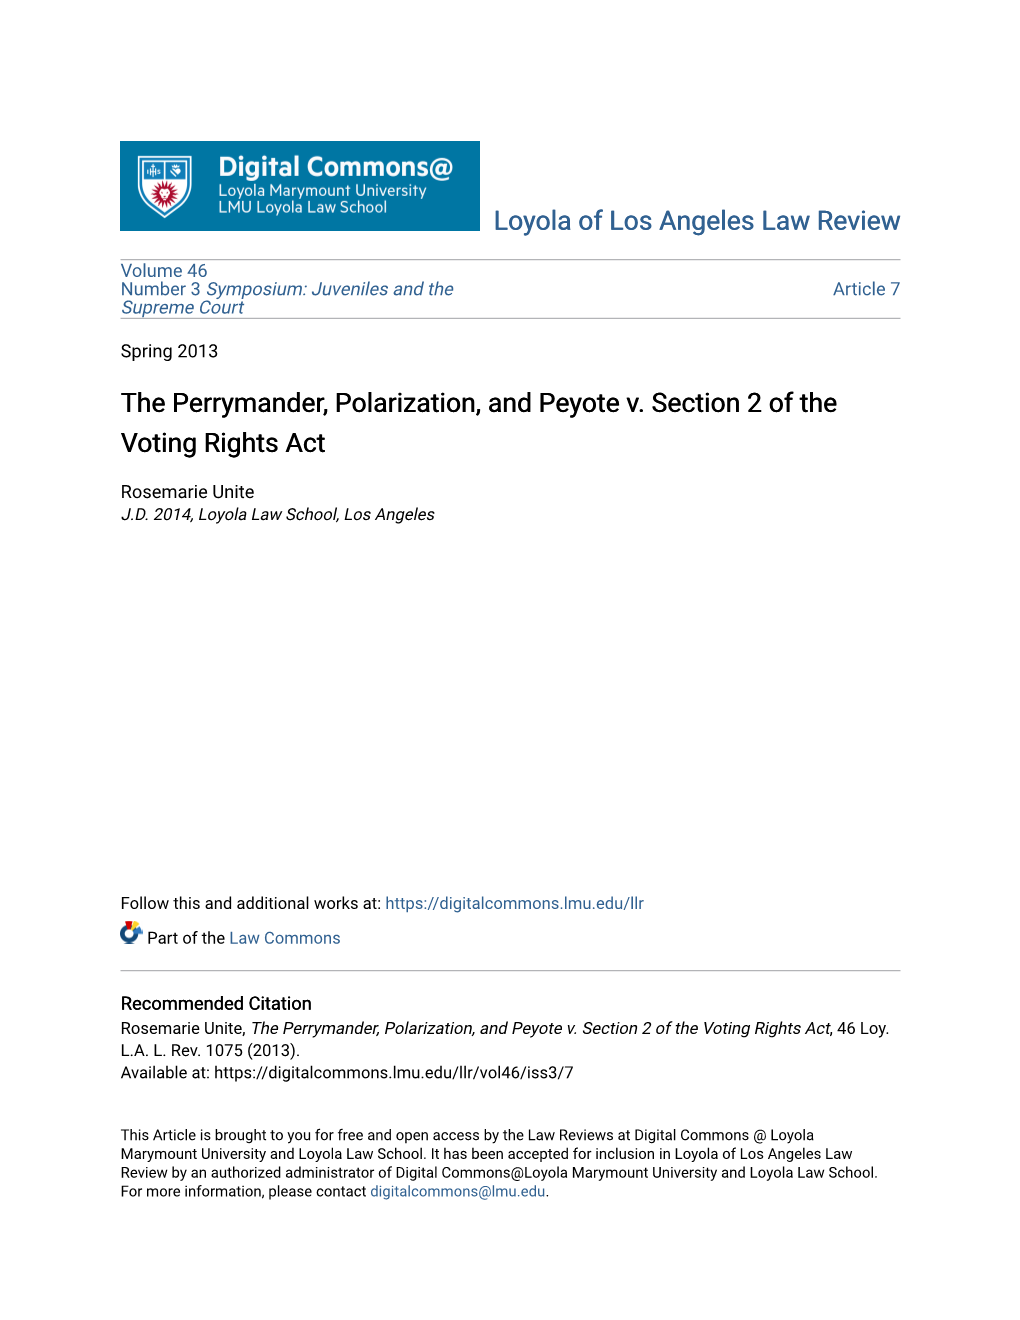 The Perrymander, Polarization, and Peyote V. Section 2 of the Voting Rights Act